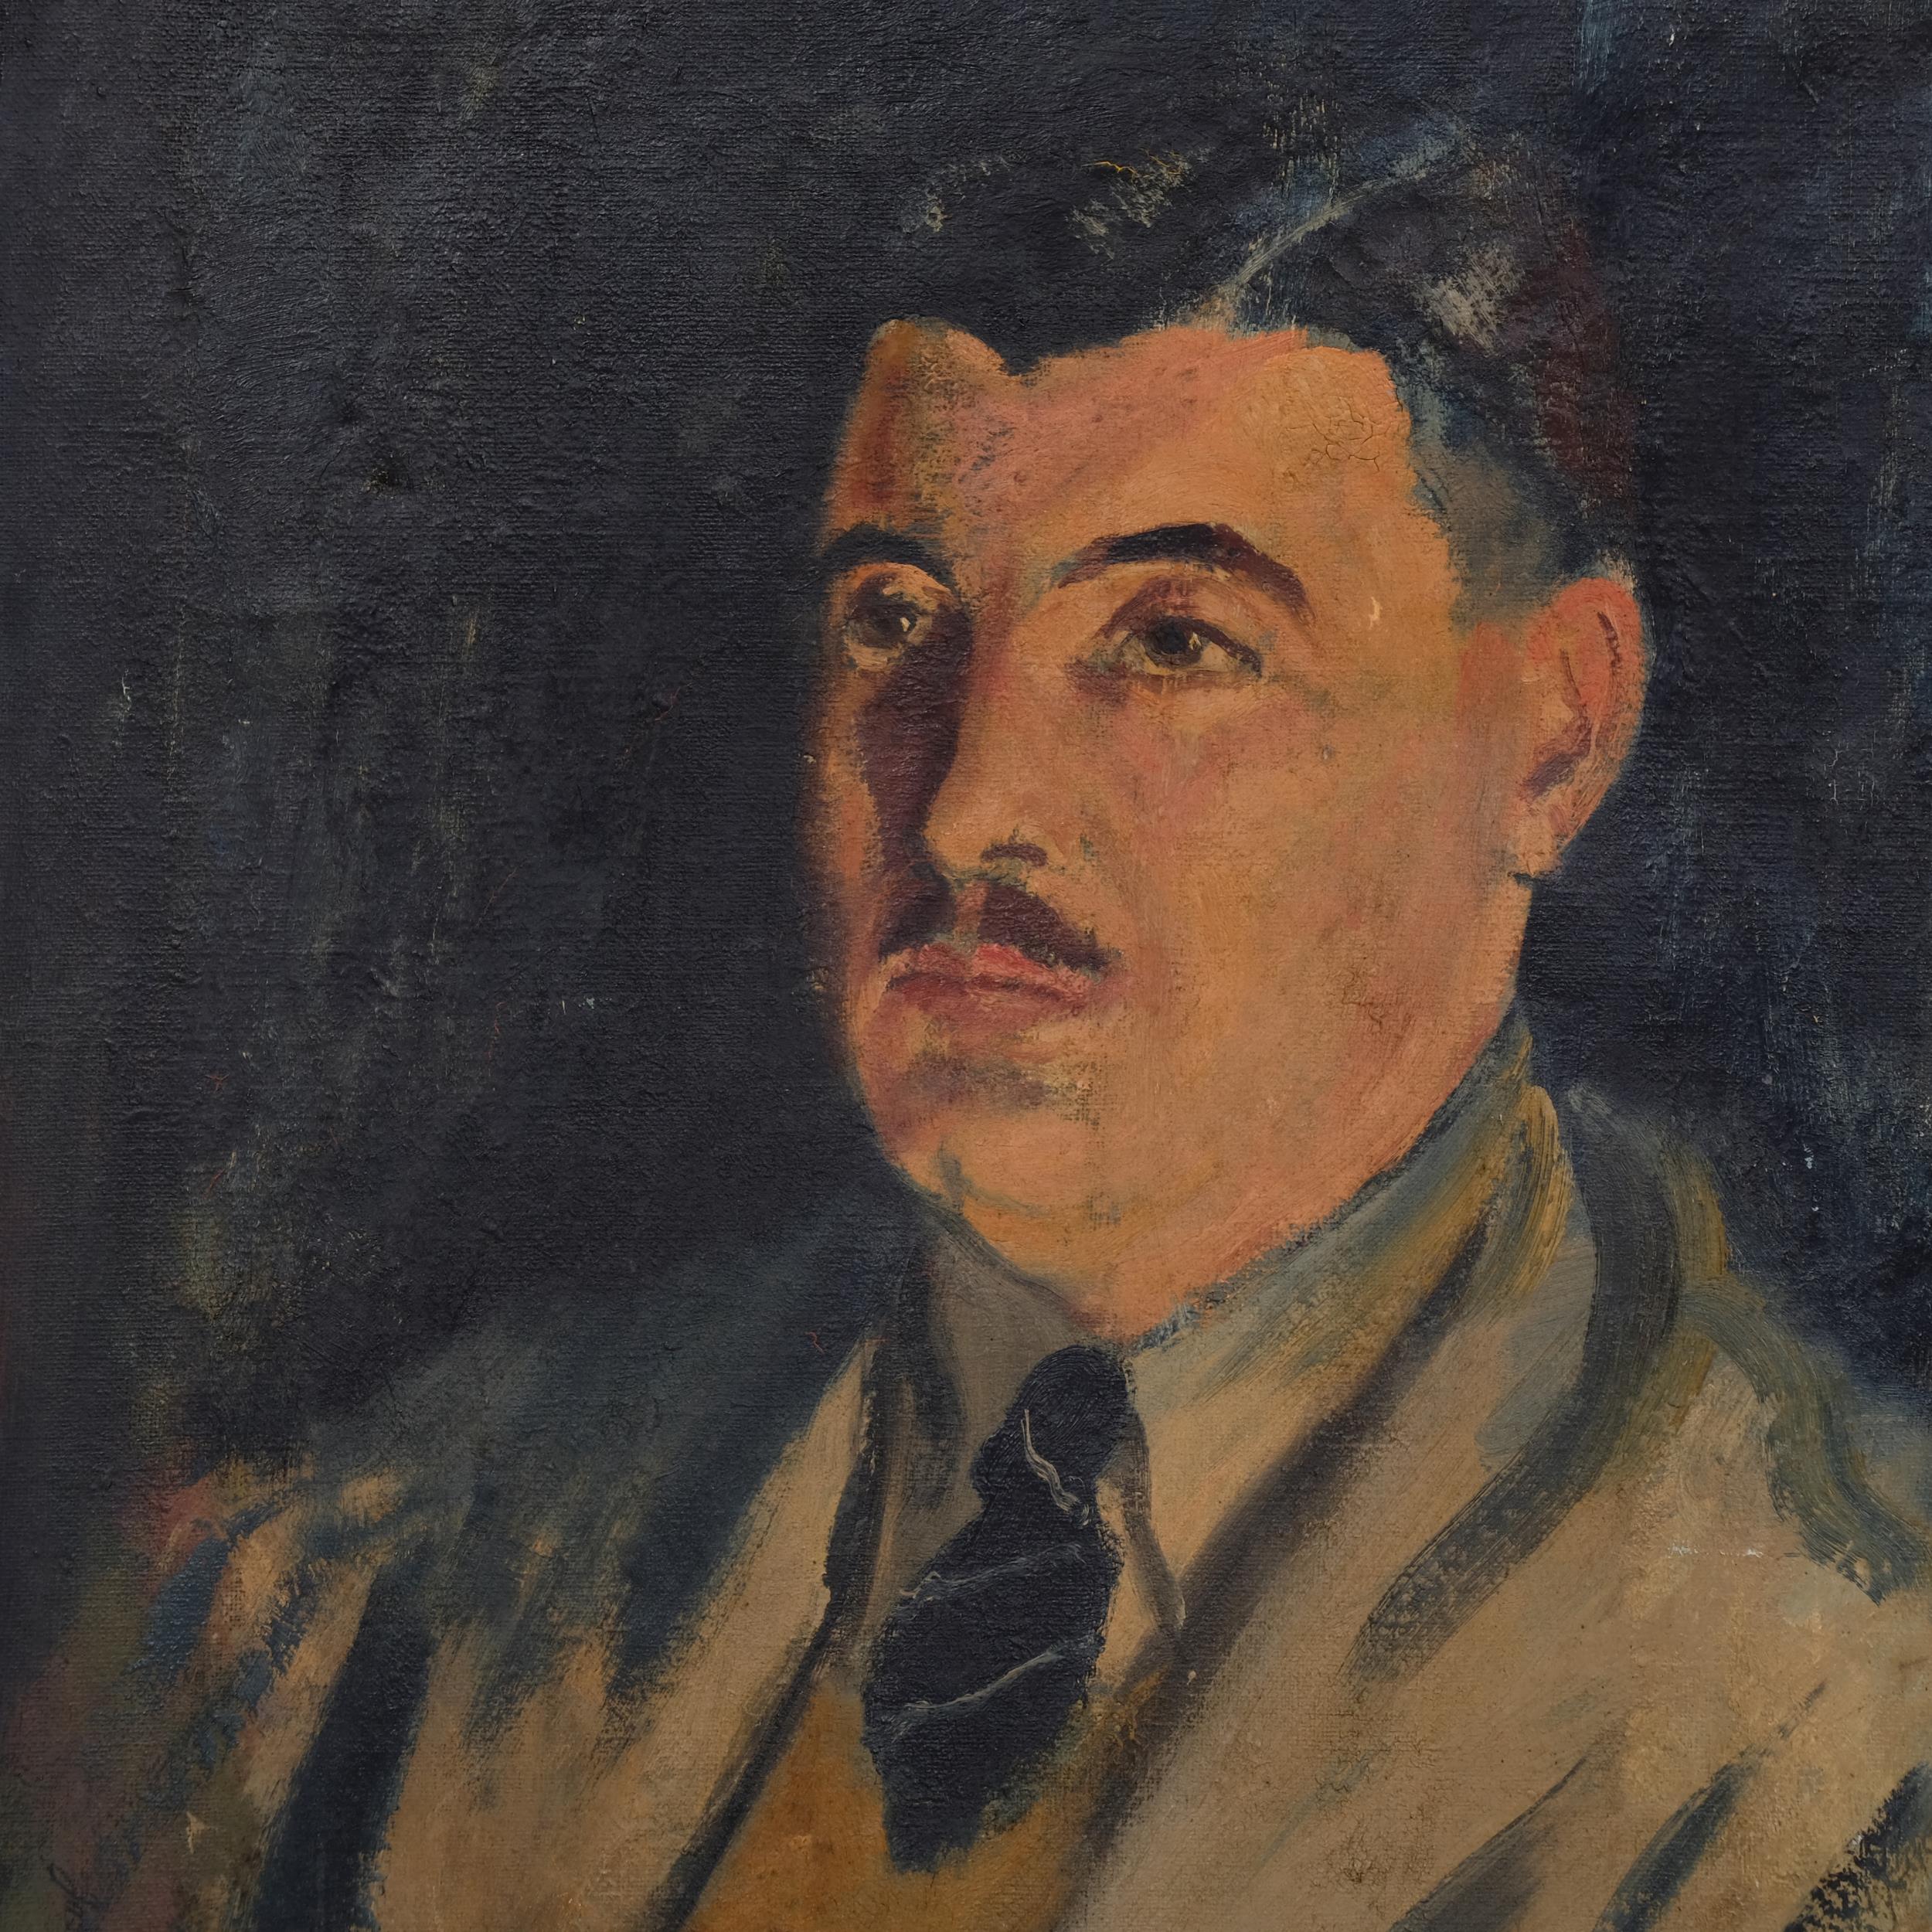 James Proudfoot, portrait of a man, oil on canvas, 61cm x 51cm, unframed Good untouched condition, - Image 2 of 4